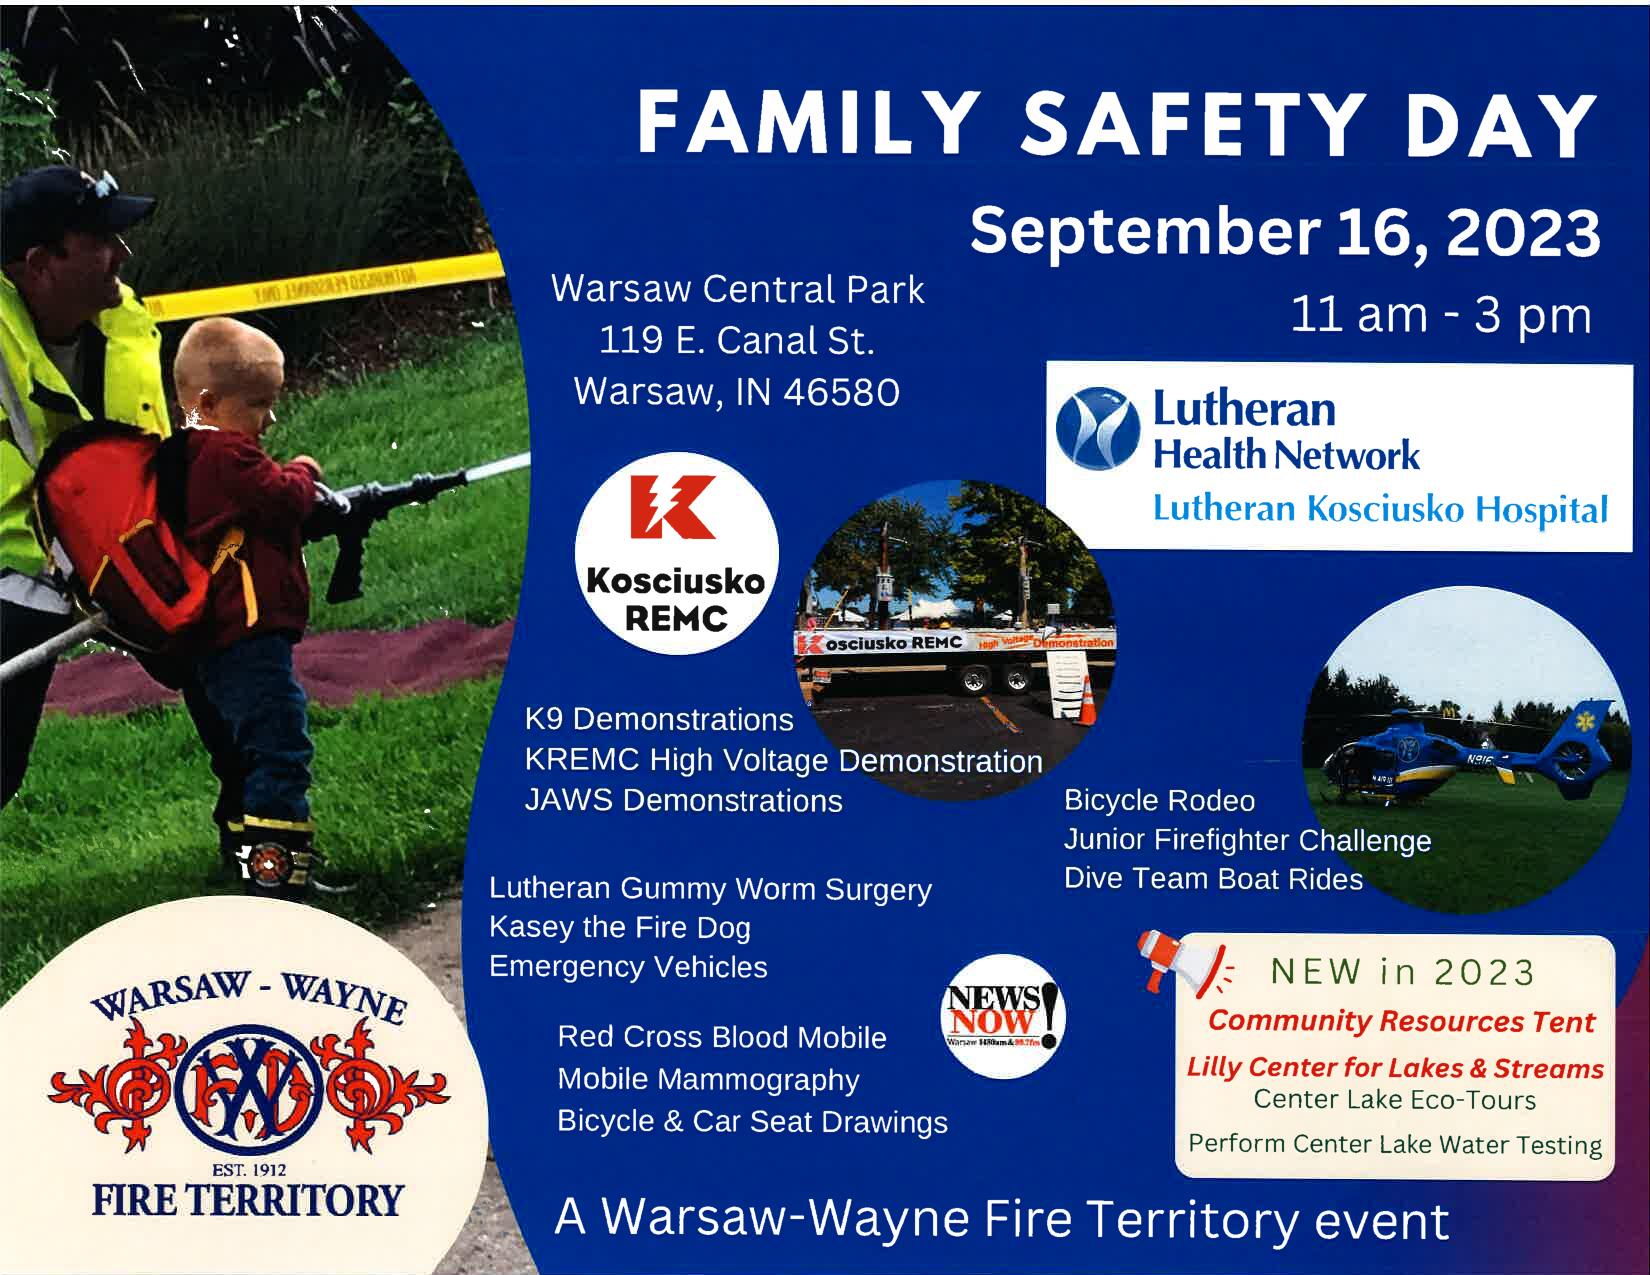 Family Safety Day flyer with information